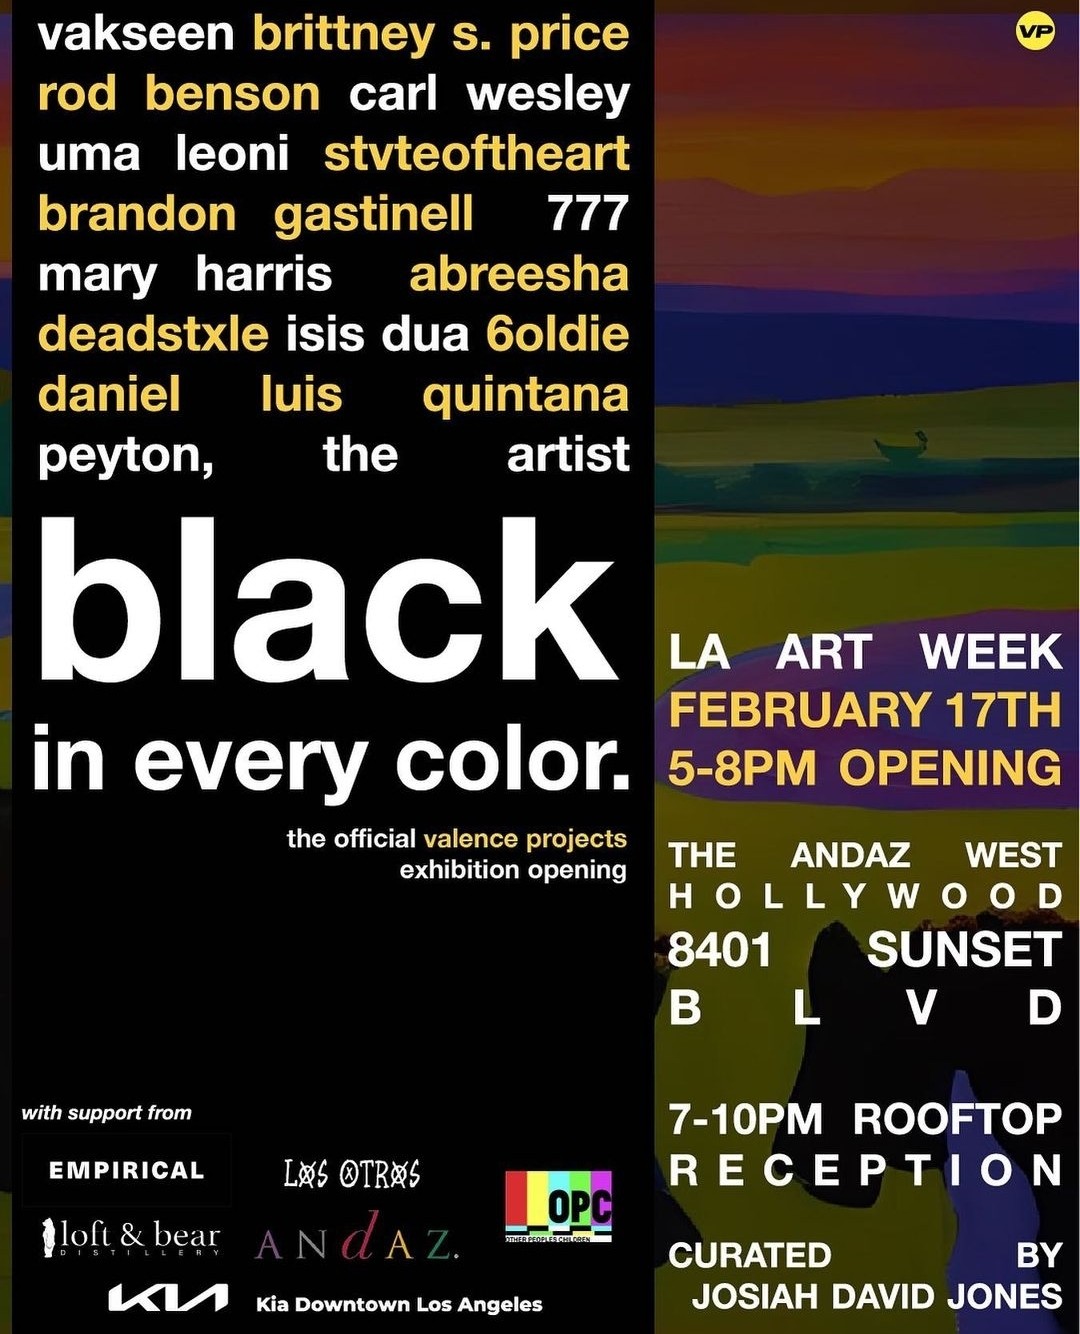 Valence Projects x Hotel Andaz “Black in Every Color” Opening Feb. 17th